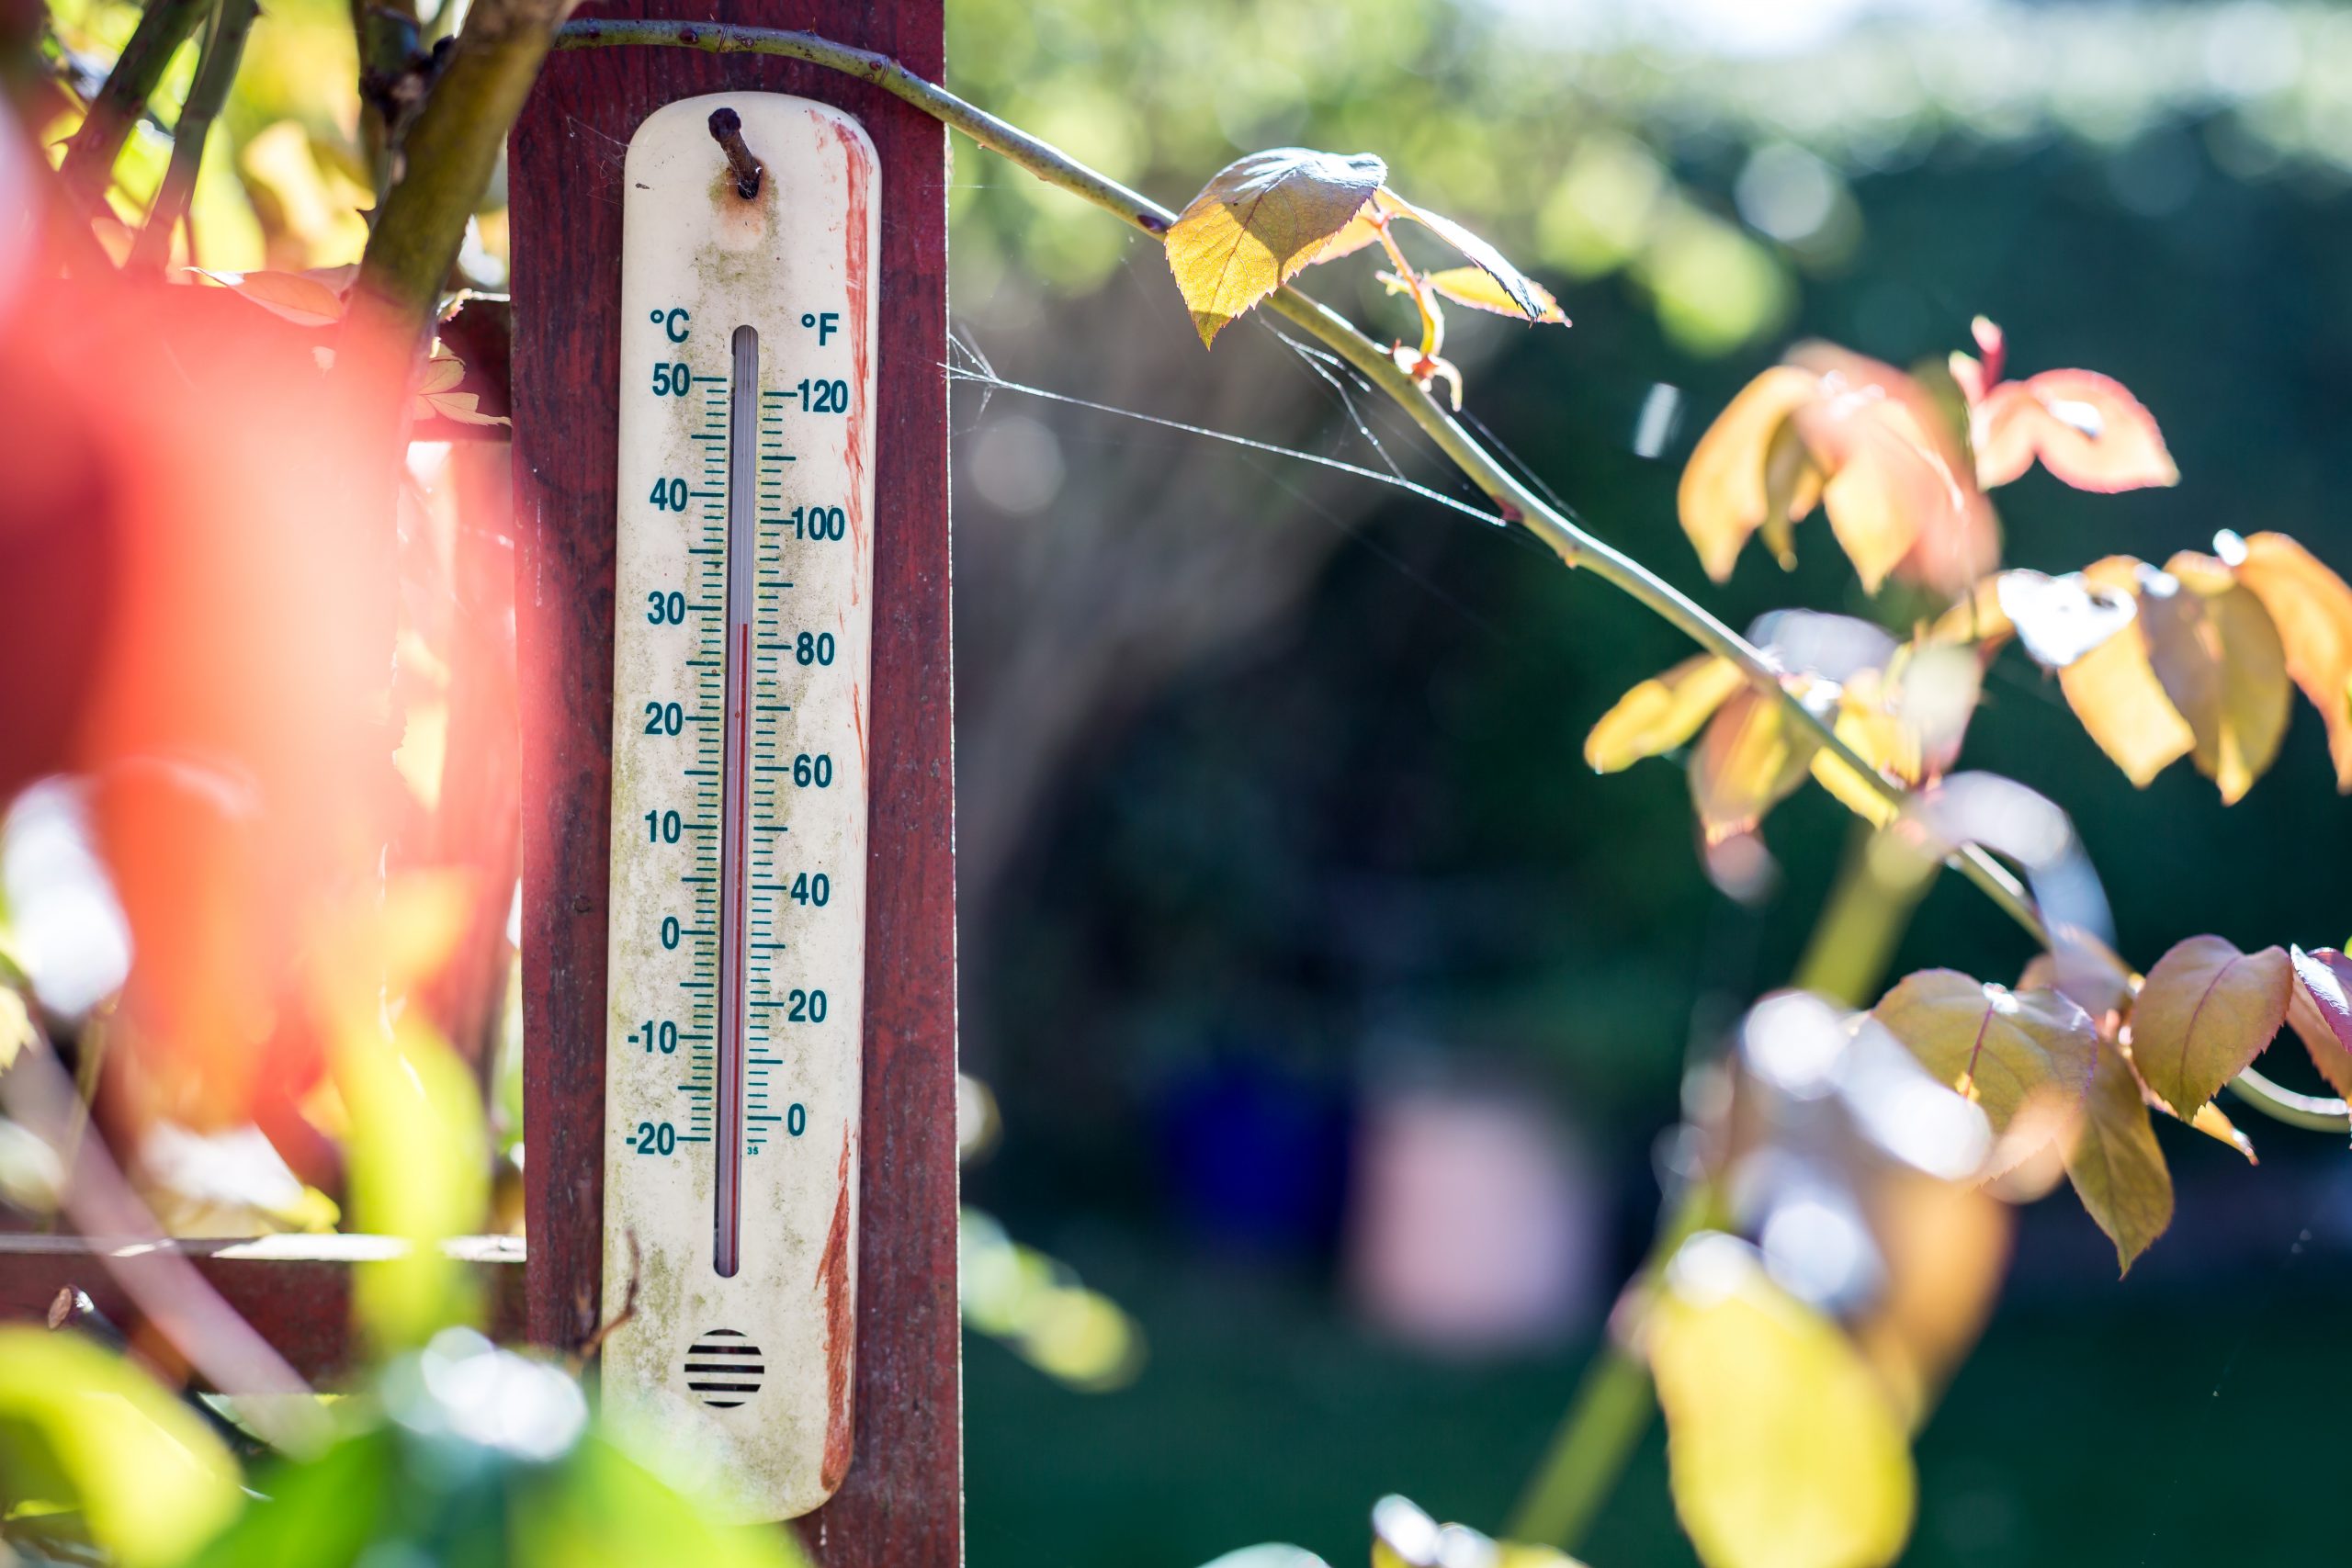 How to Keep Your Garden Healthy in a Heatwave